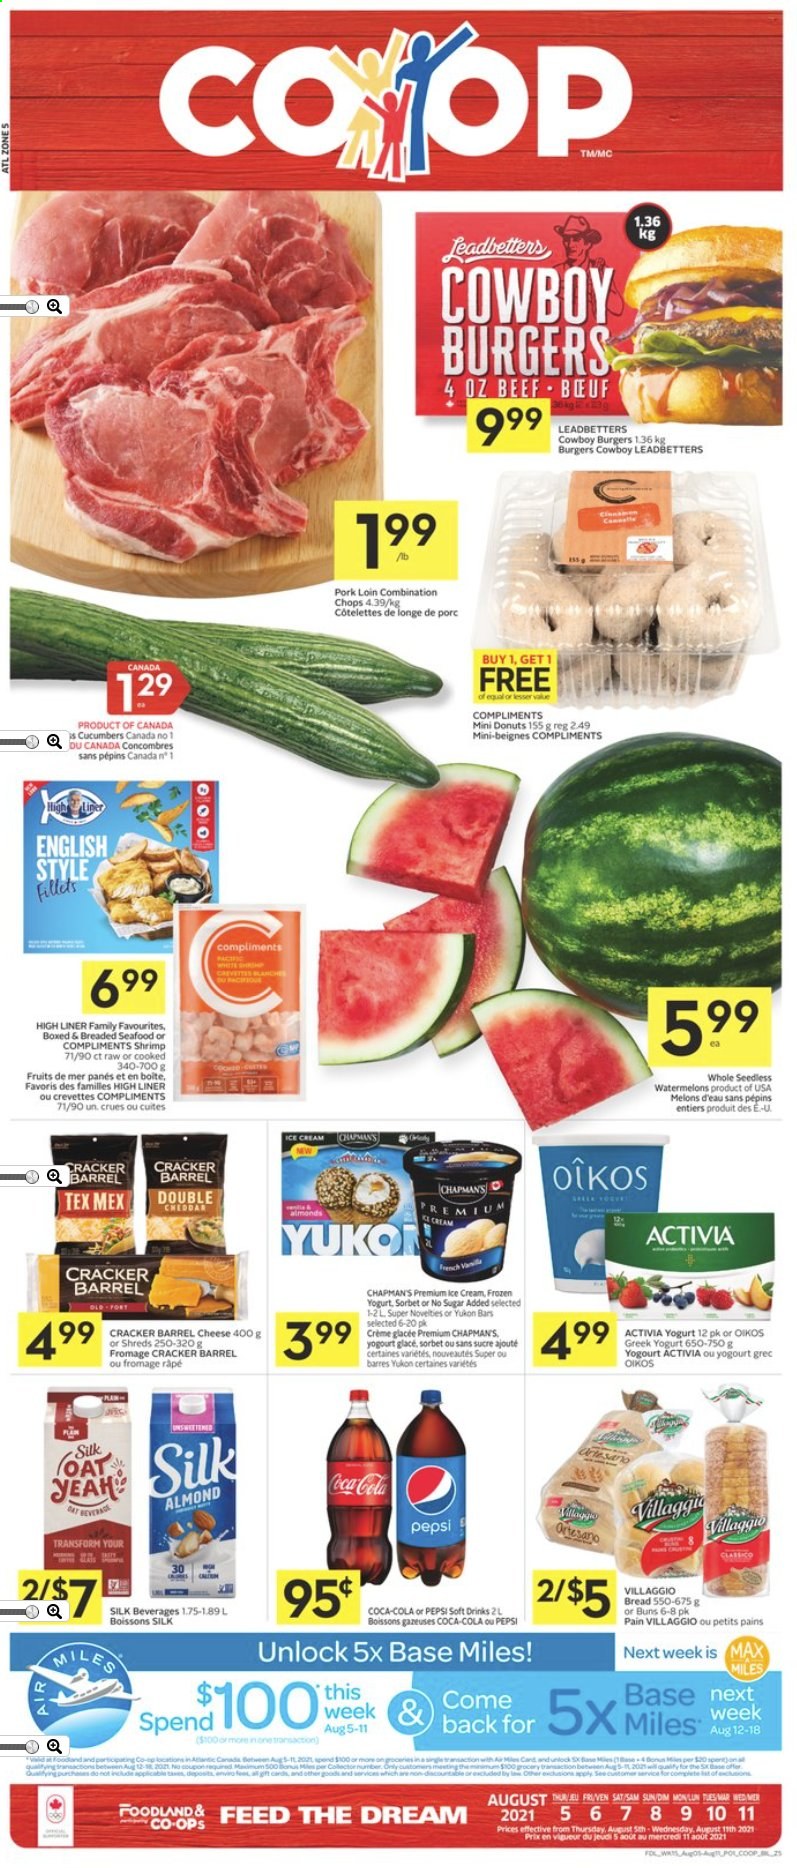 thumbnail - Co-op Flyer - August 05, 2021 - August 11, 2021 - Sales products - bread, buns, donut, cucumber, melons, seafood, shrimps, hamburger, cheddar, cheese, greek yoghurt, yoghurt, Activia, Oikos, Silk, ice cream, crackers, Coca-Cola, Pepsi, soft drink, pork loin, pork meat. Page 1.